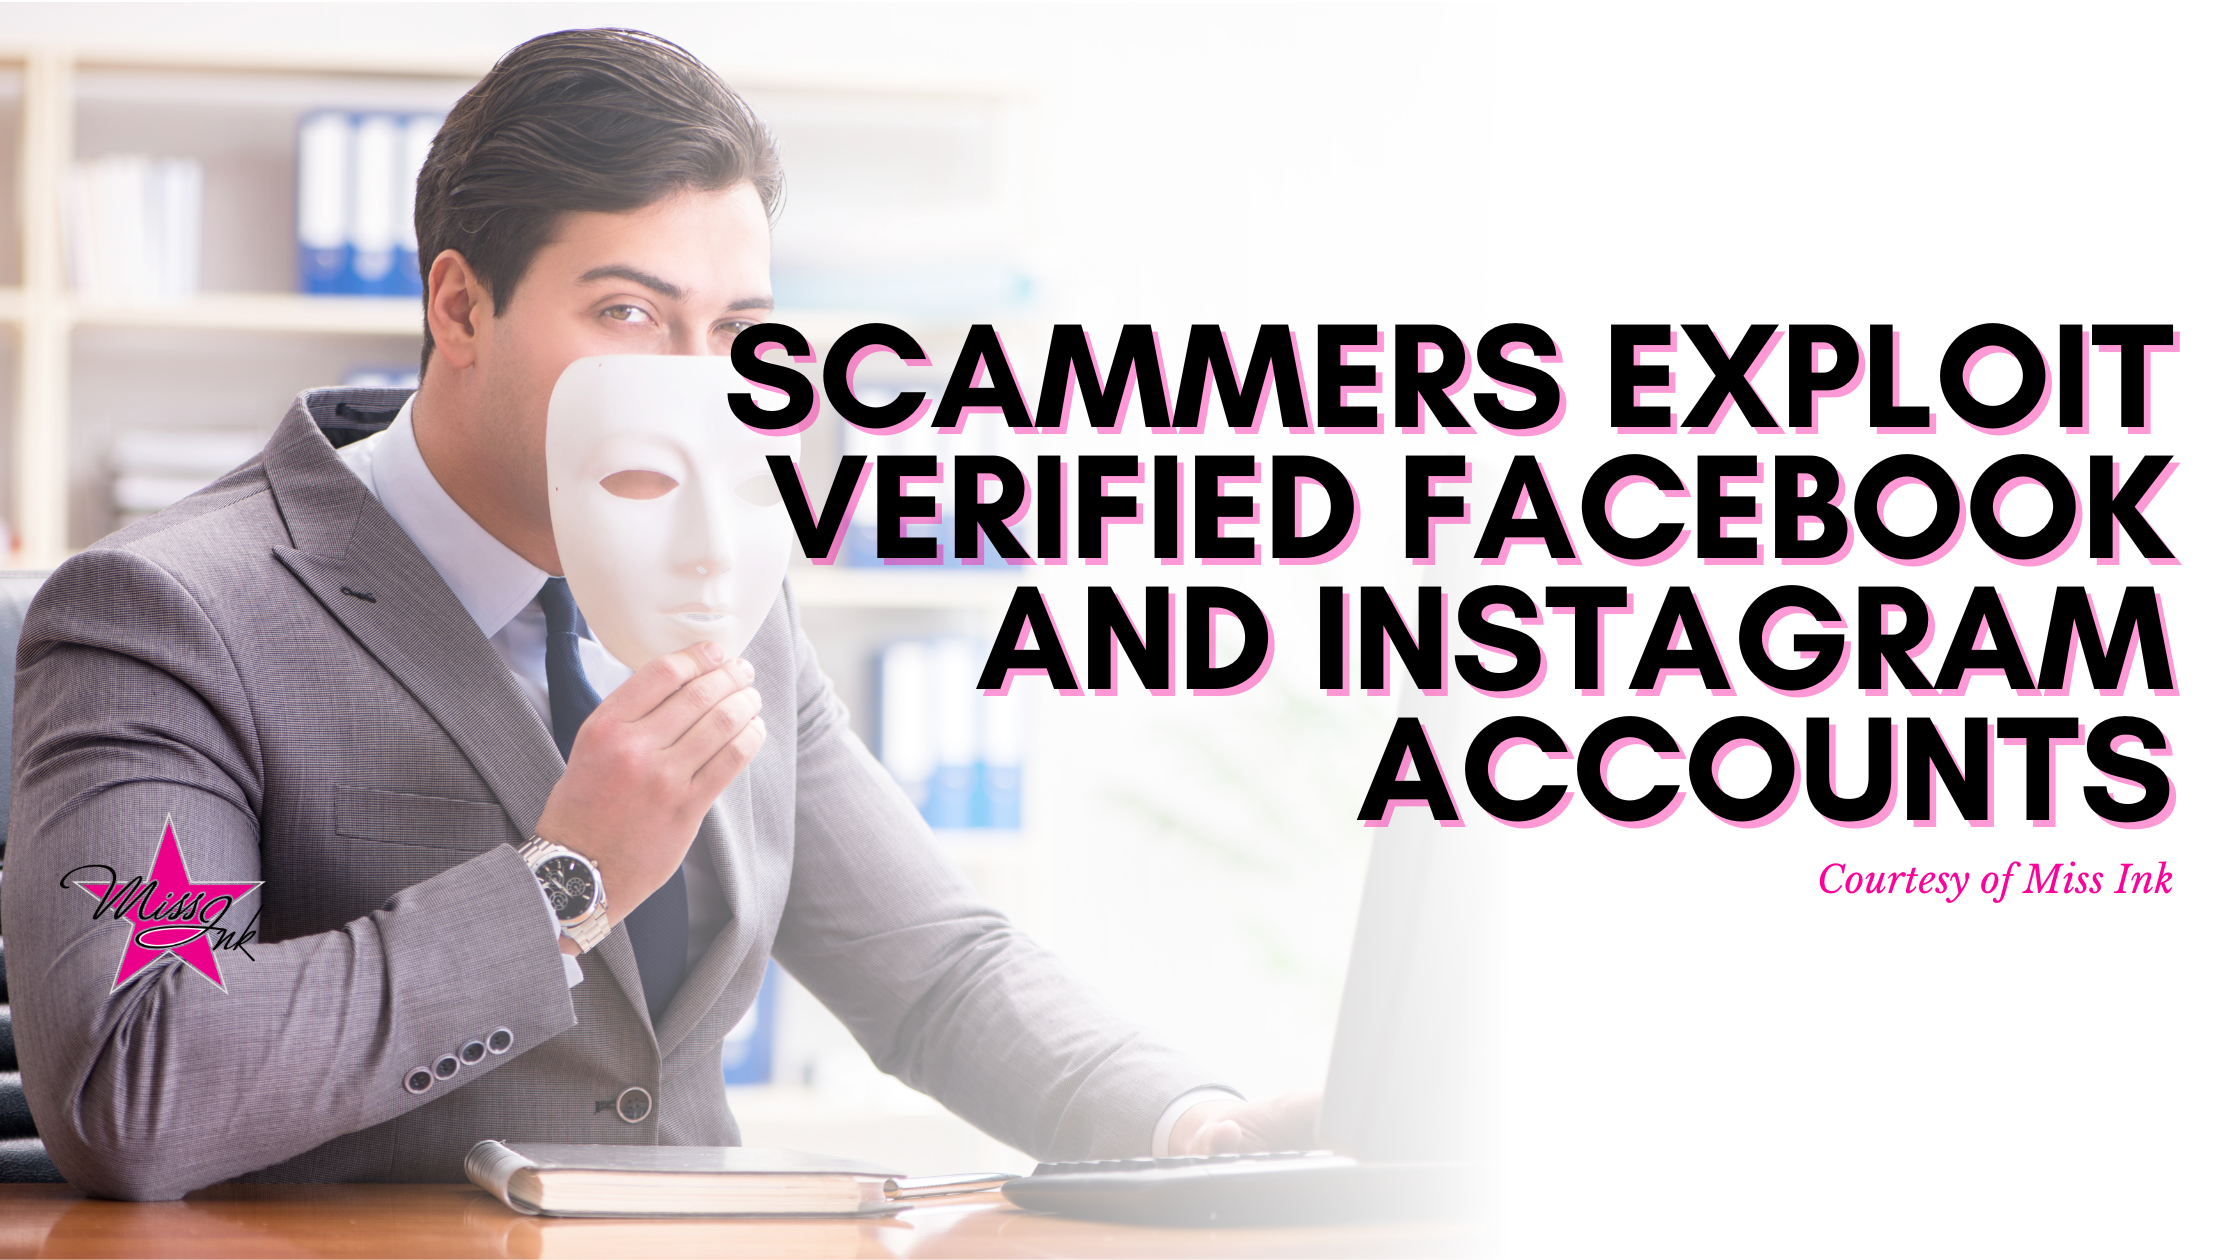 Scammers Exploit Verified Facebook and Instagram Accounts. - Miss Ink